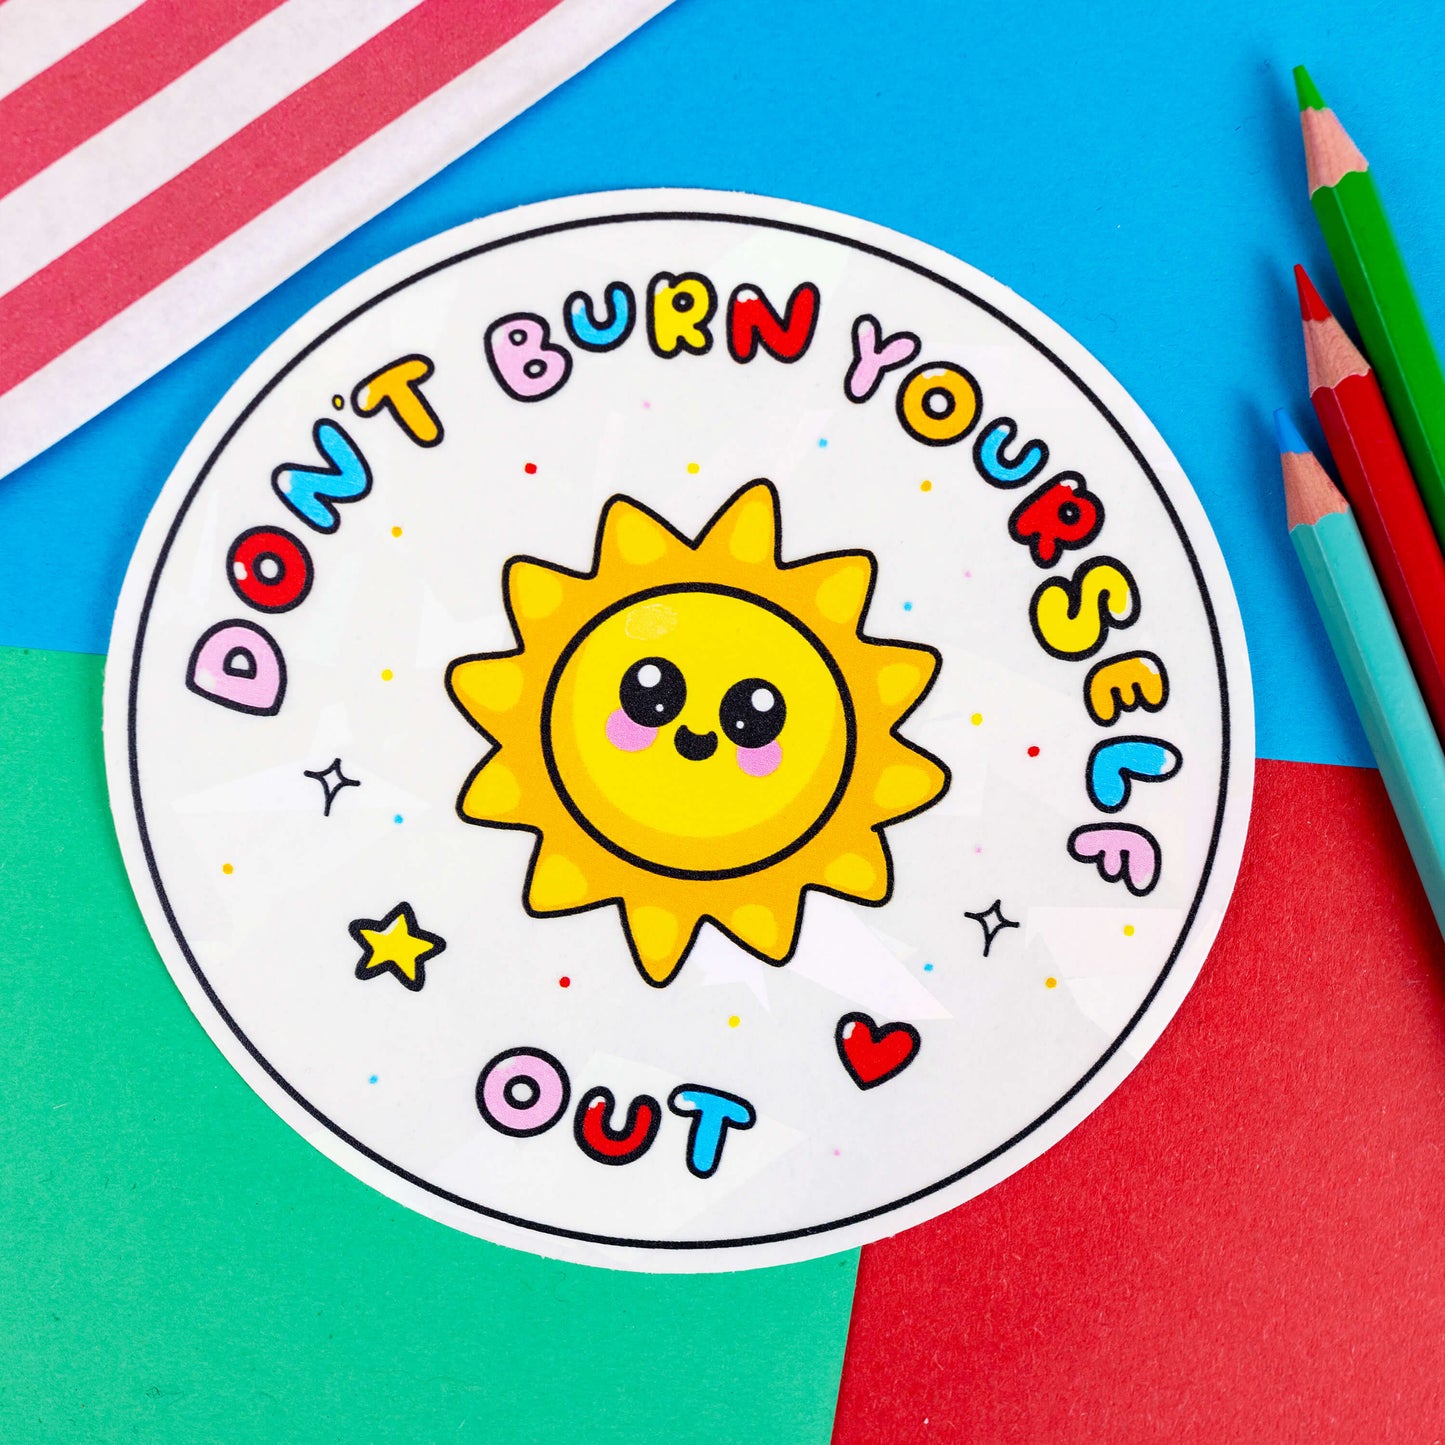 The Don't Burn Yourself Out Sun Catcher Rainbow Window Sticker on a red, blue and green background with colouring pencils and red stripe candy bag. The circle holographic sticker features a smiling sunshine with pink blush in the middle with rainbow bubble writing reading 'don't burn yourself out' with a yellow star, red heart, black sparkle outlines and rainbow dots all over. The design is inspired by self care.